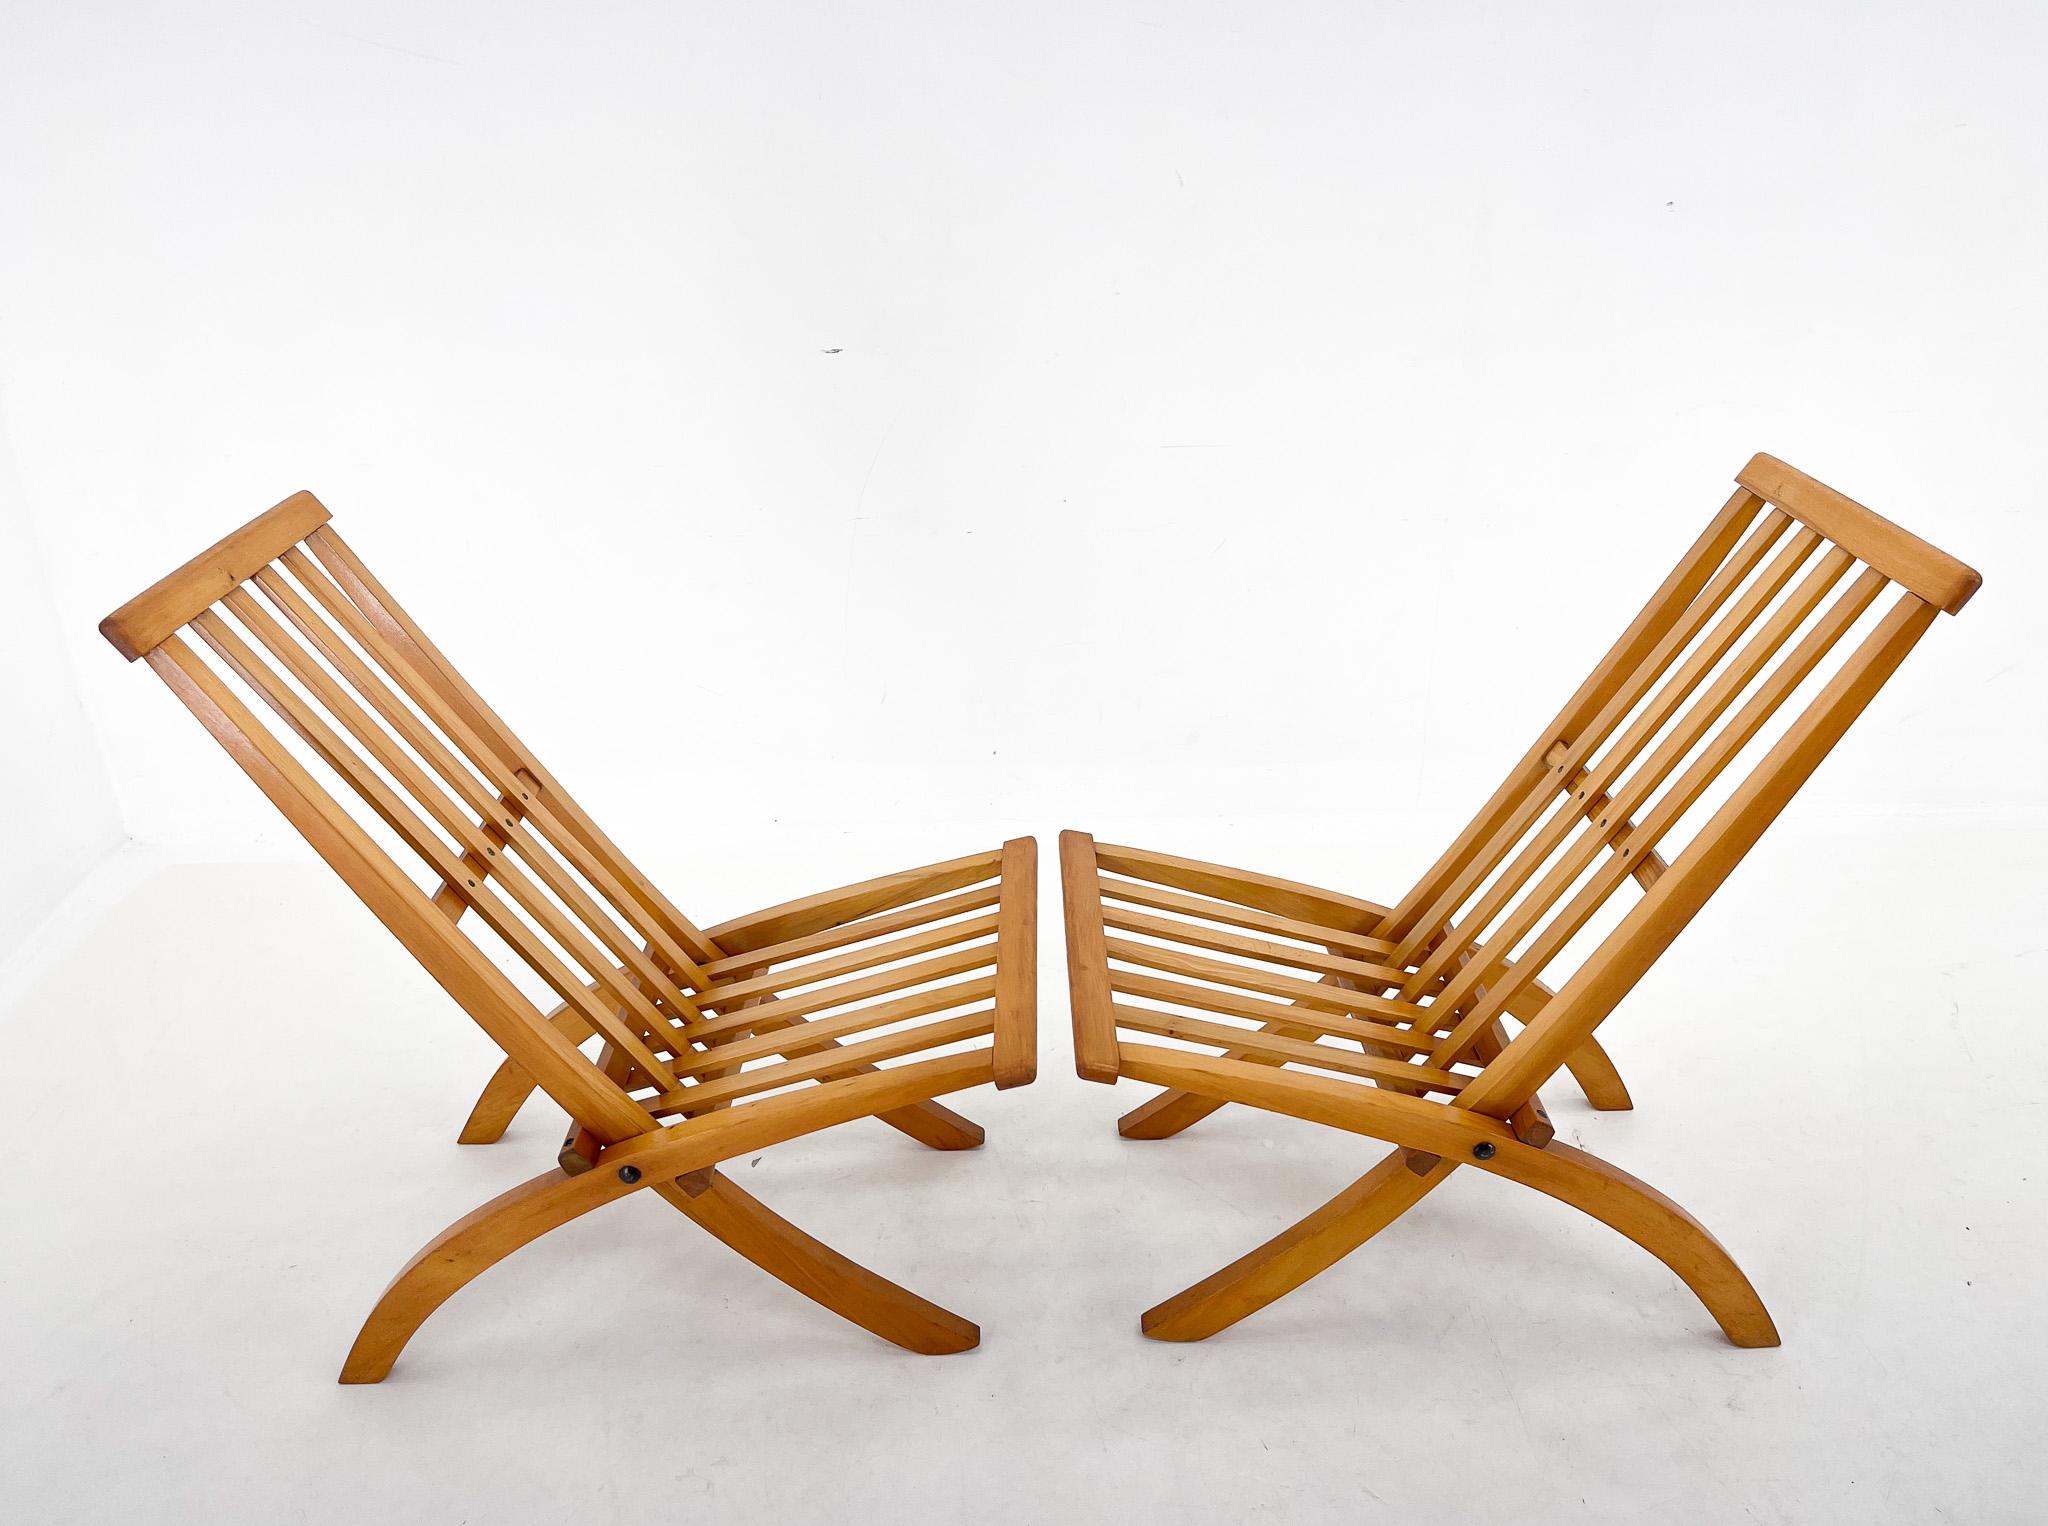 Set of two foldable chairs made of beech wood. The chairs were designed by an architect Ott Rothmayer in the first half of 20th century.
